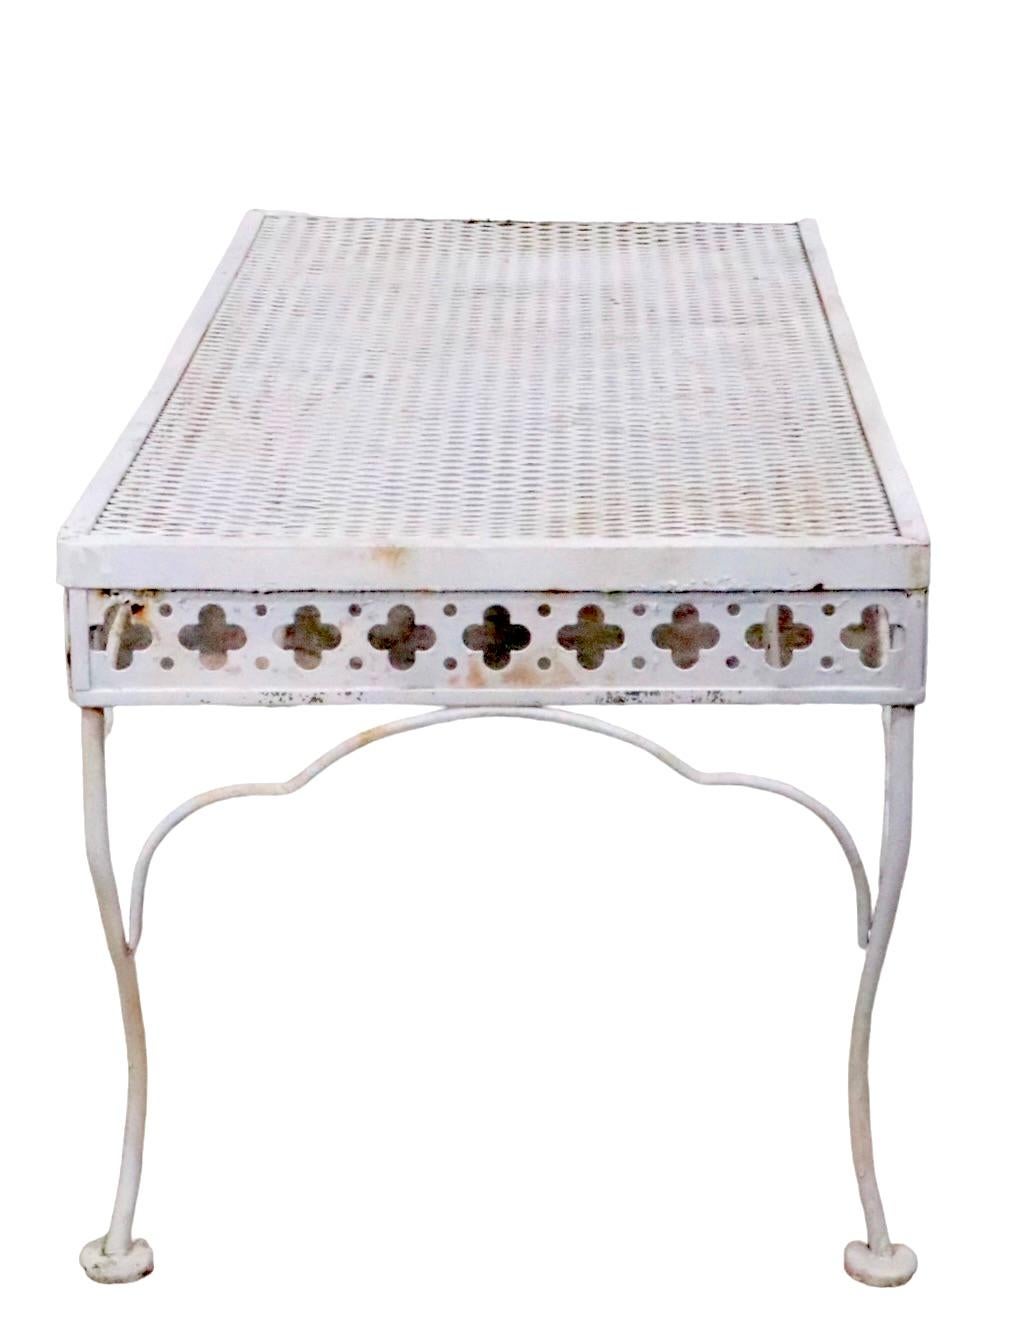 Chic vintage Taj Mahal pattern  garden, patio, poolside coffee table , by Salterini. Hard to find the coffee table from this sought after series. 
 The table is in very good original, clean and ready to use condition showing only light cosmetic wear